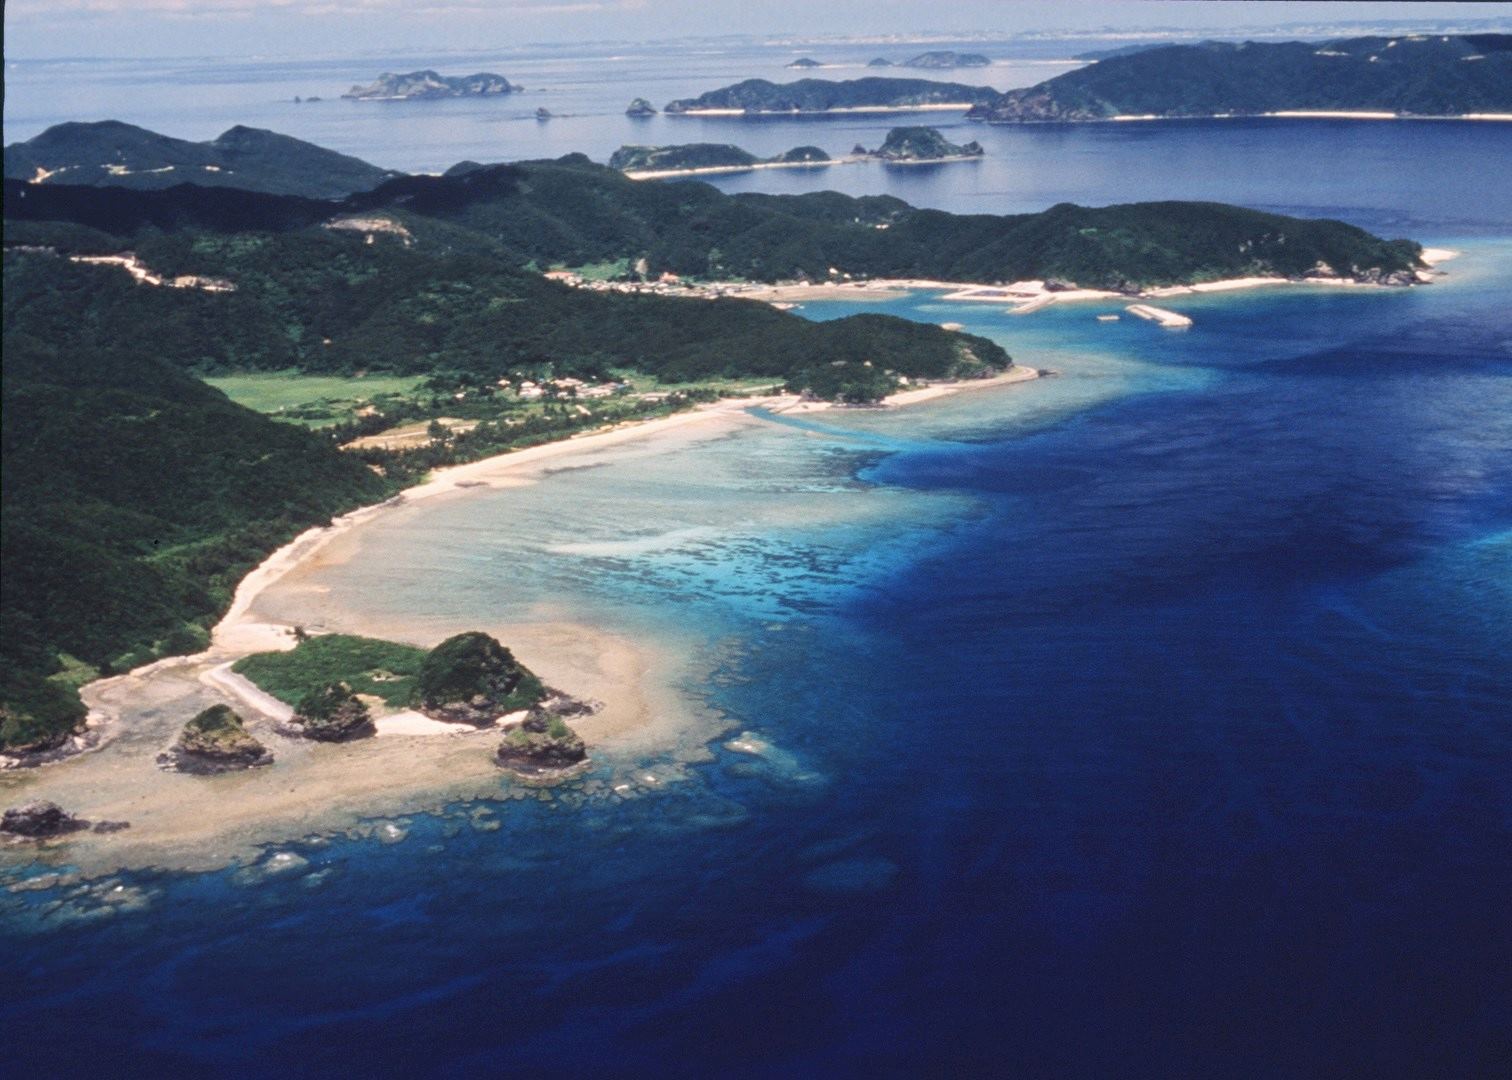 Visit Zamami Island on a trip to Japan | Audley Travel